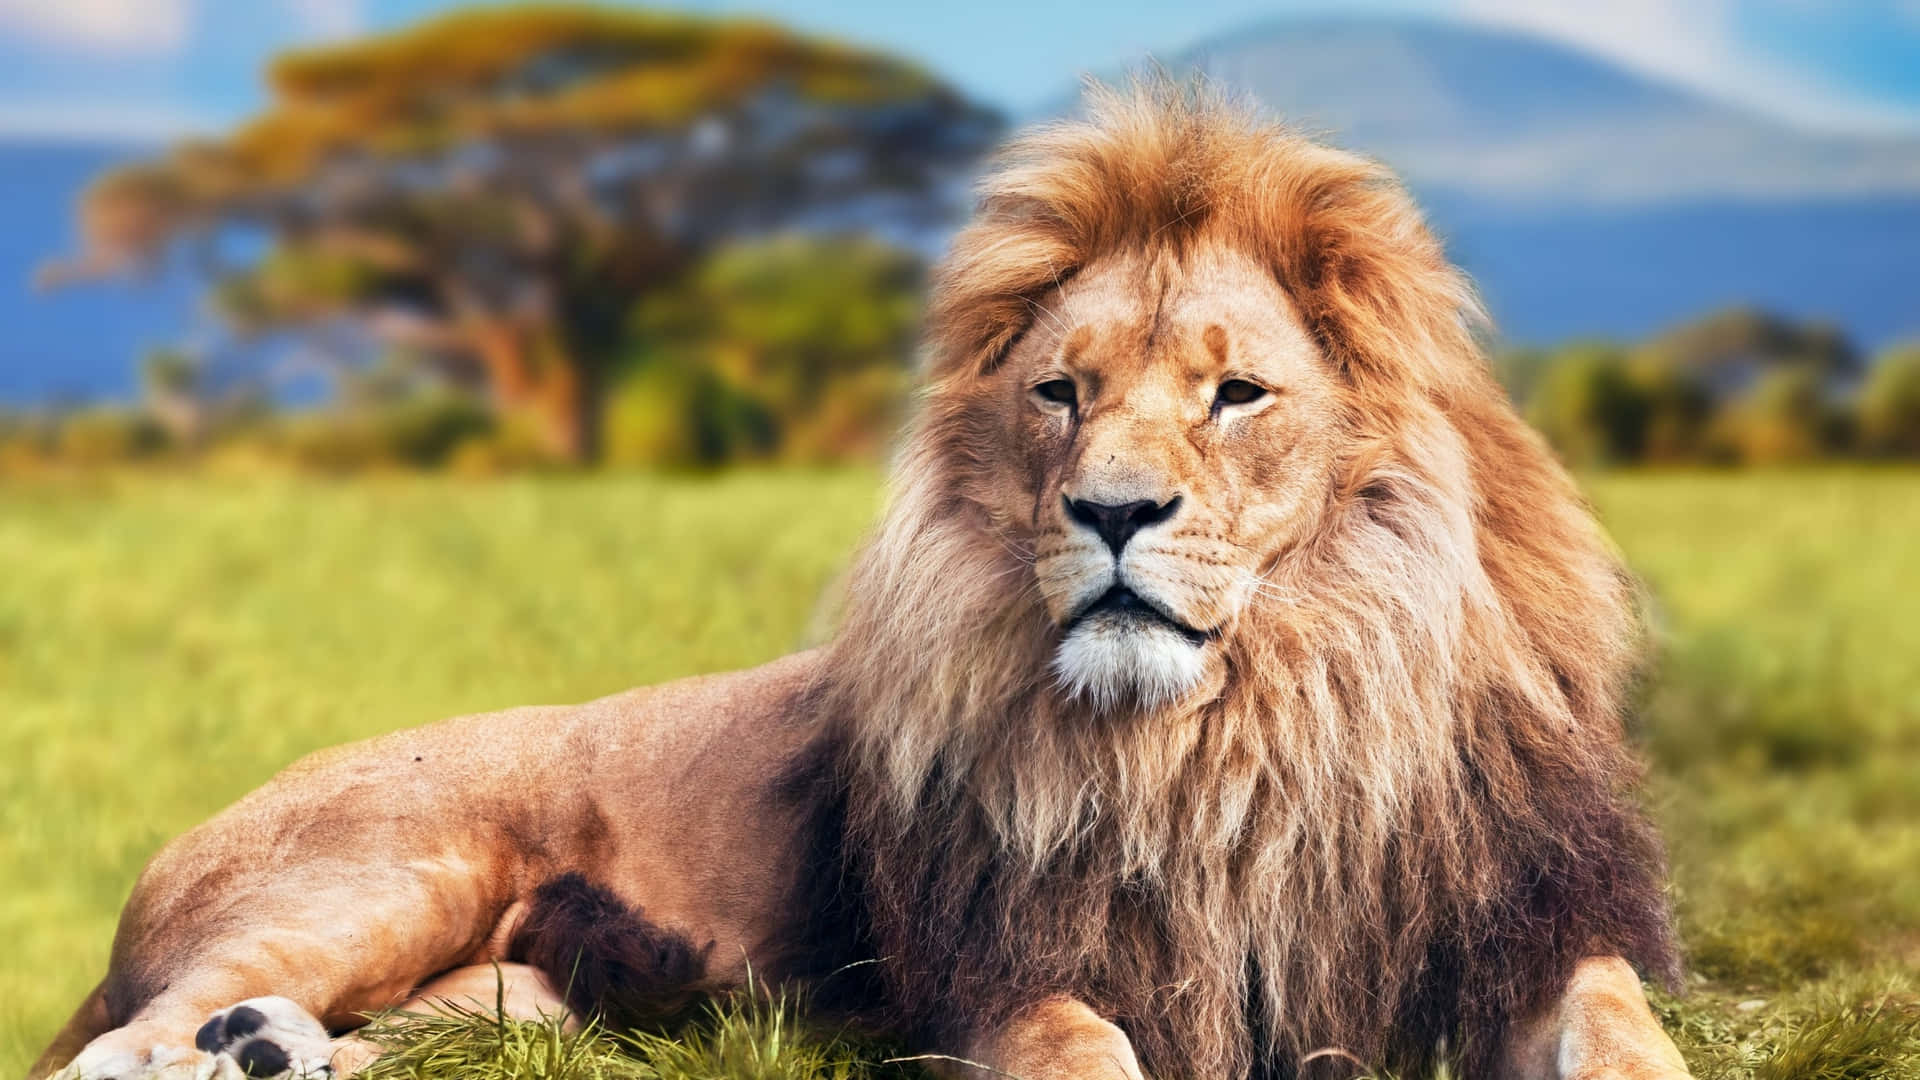 A regal male lion on a grassy hill